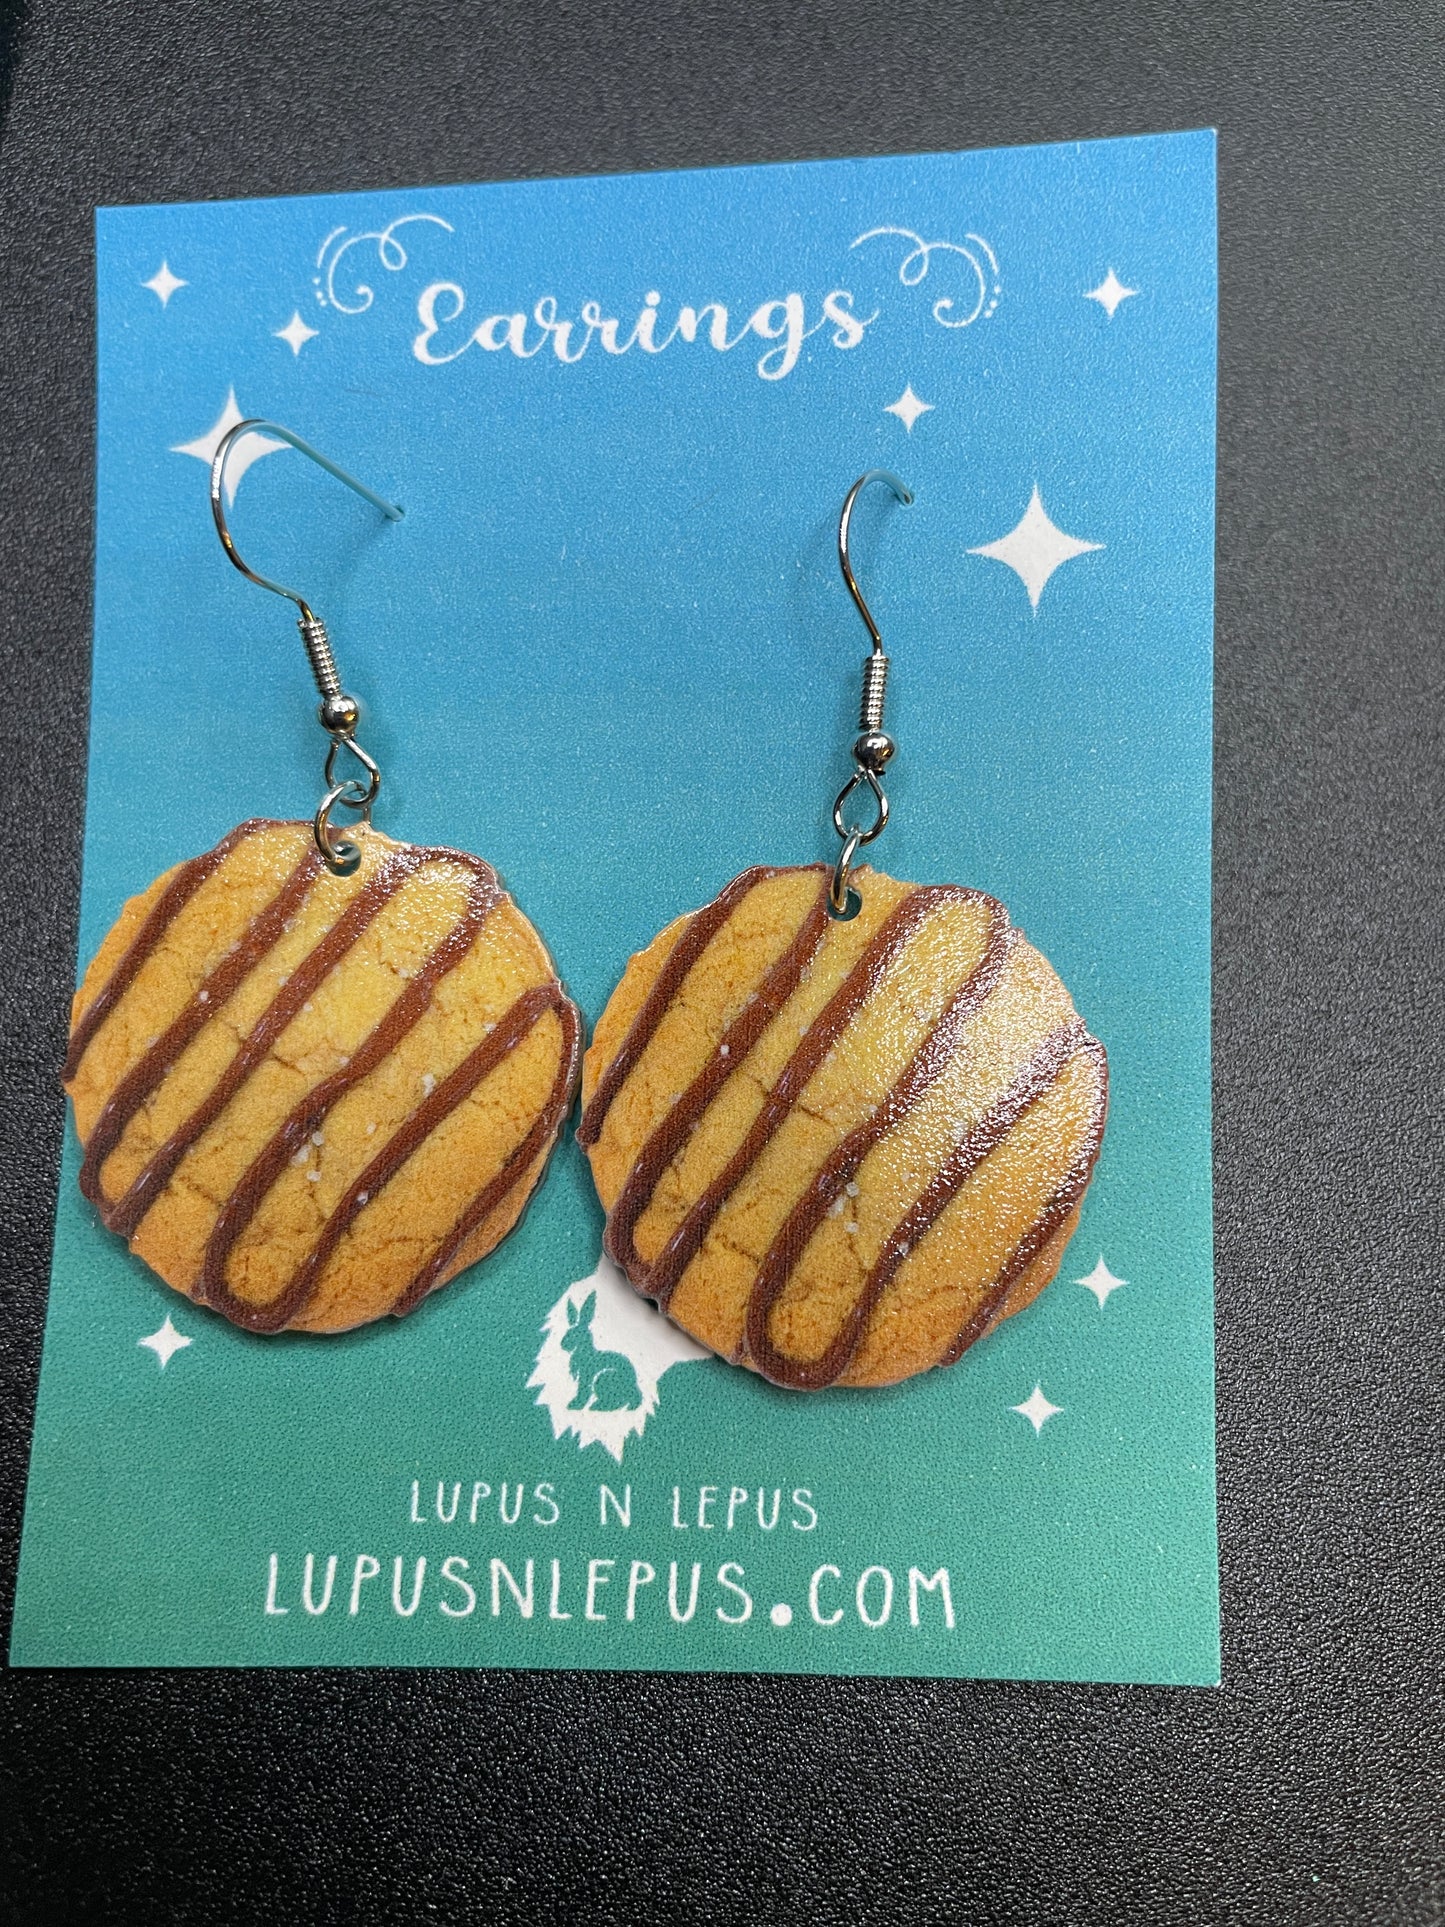 pb and j earrings, peanut butter and jelly earrings, cookie earrings, cookies earrings, dangle, fishhook, acrylic earrings, dangle, hypoallergenic, handmade, nerdy, nerdy earrings, nerdy gift, cute earrings